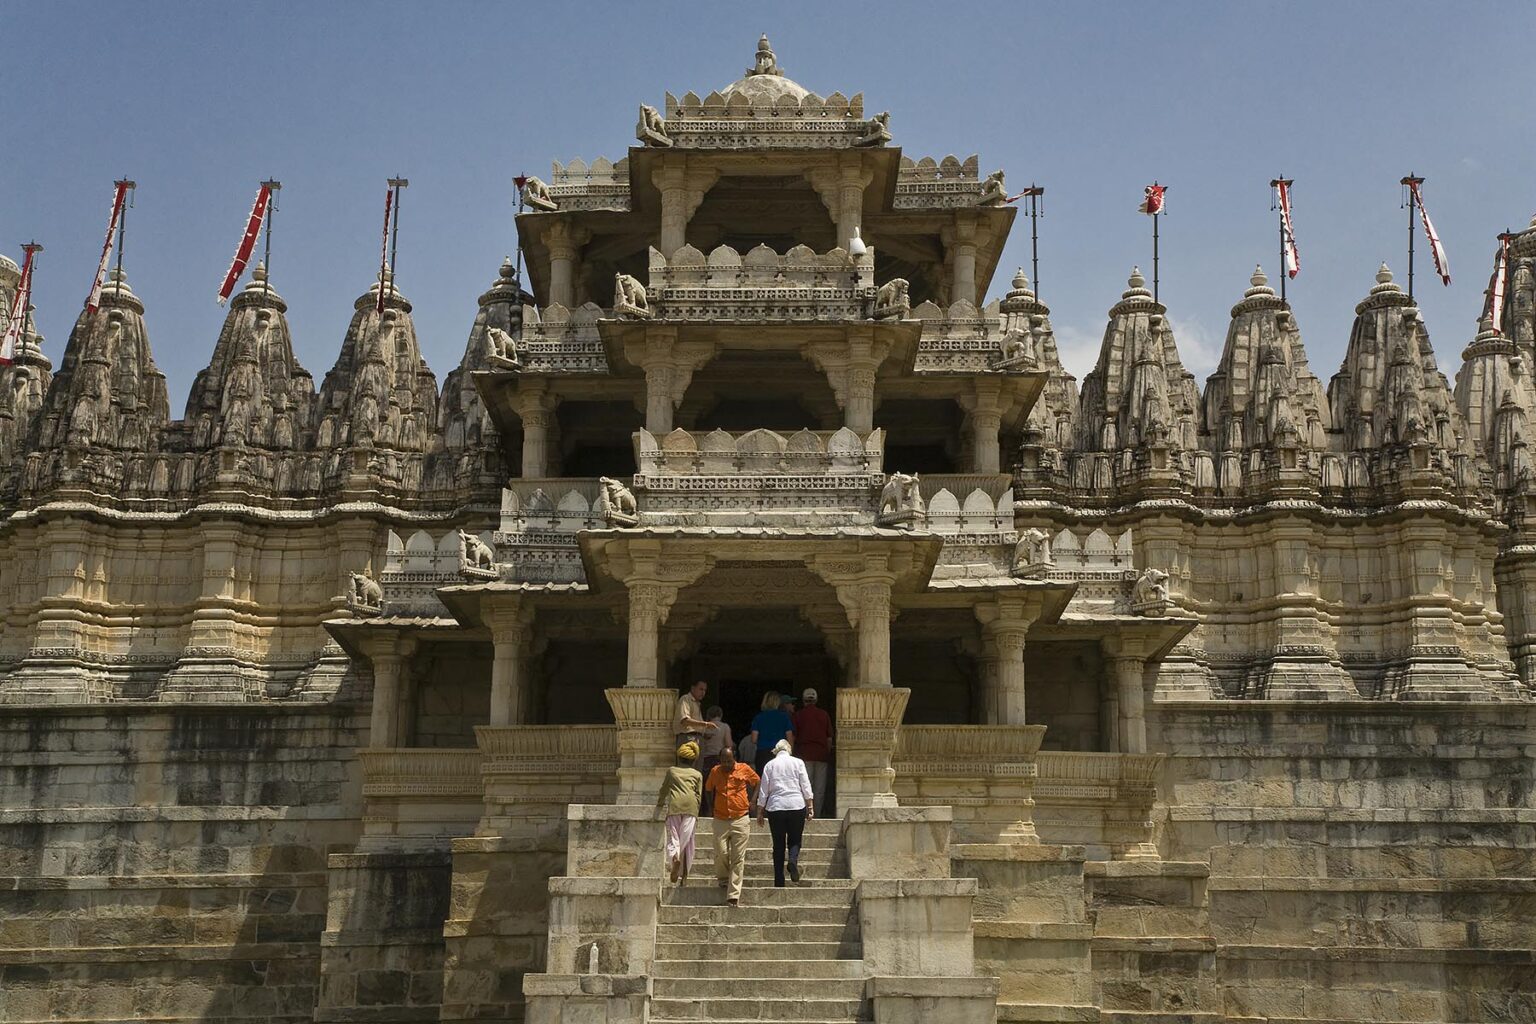 CHAUMUKHA MANDIR TEMPLE at RANAKPUR with 1444 pillars is one of the finest JAIN TEMPLES ever built in the Pali District of RAJASTHAN near Sadri - INDIA